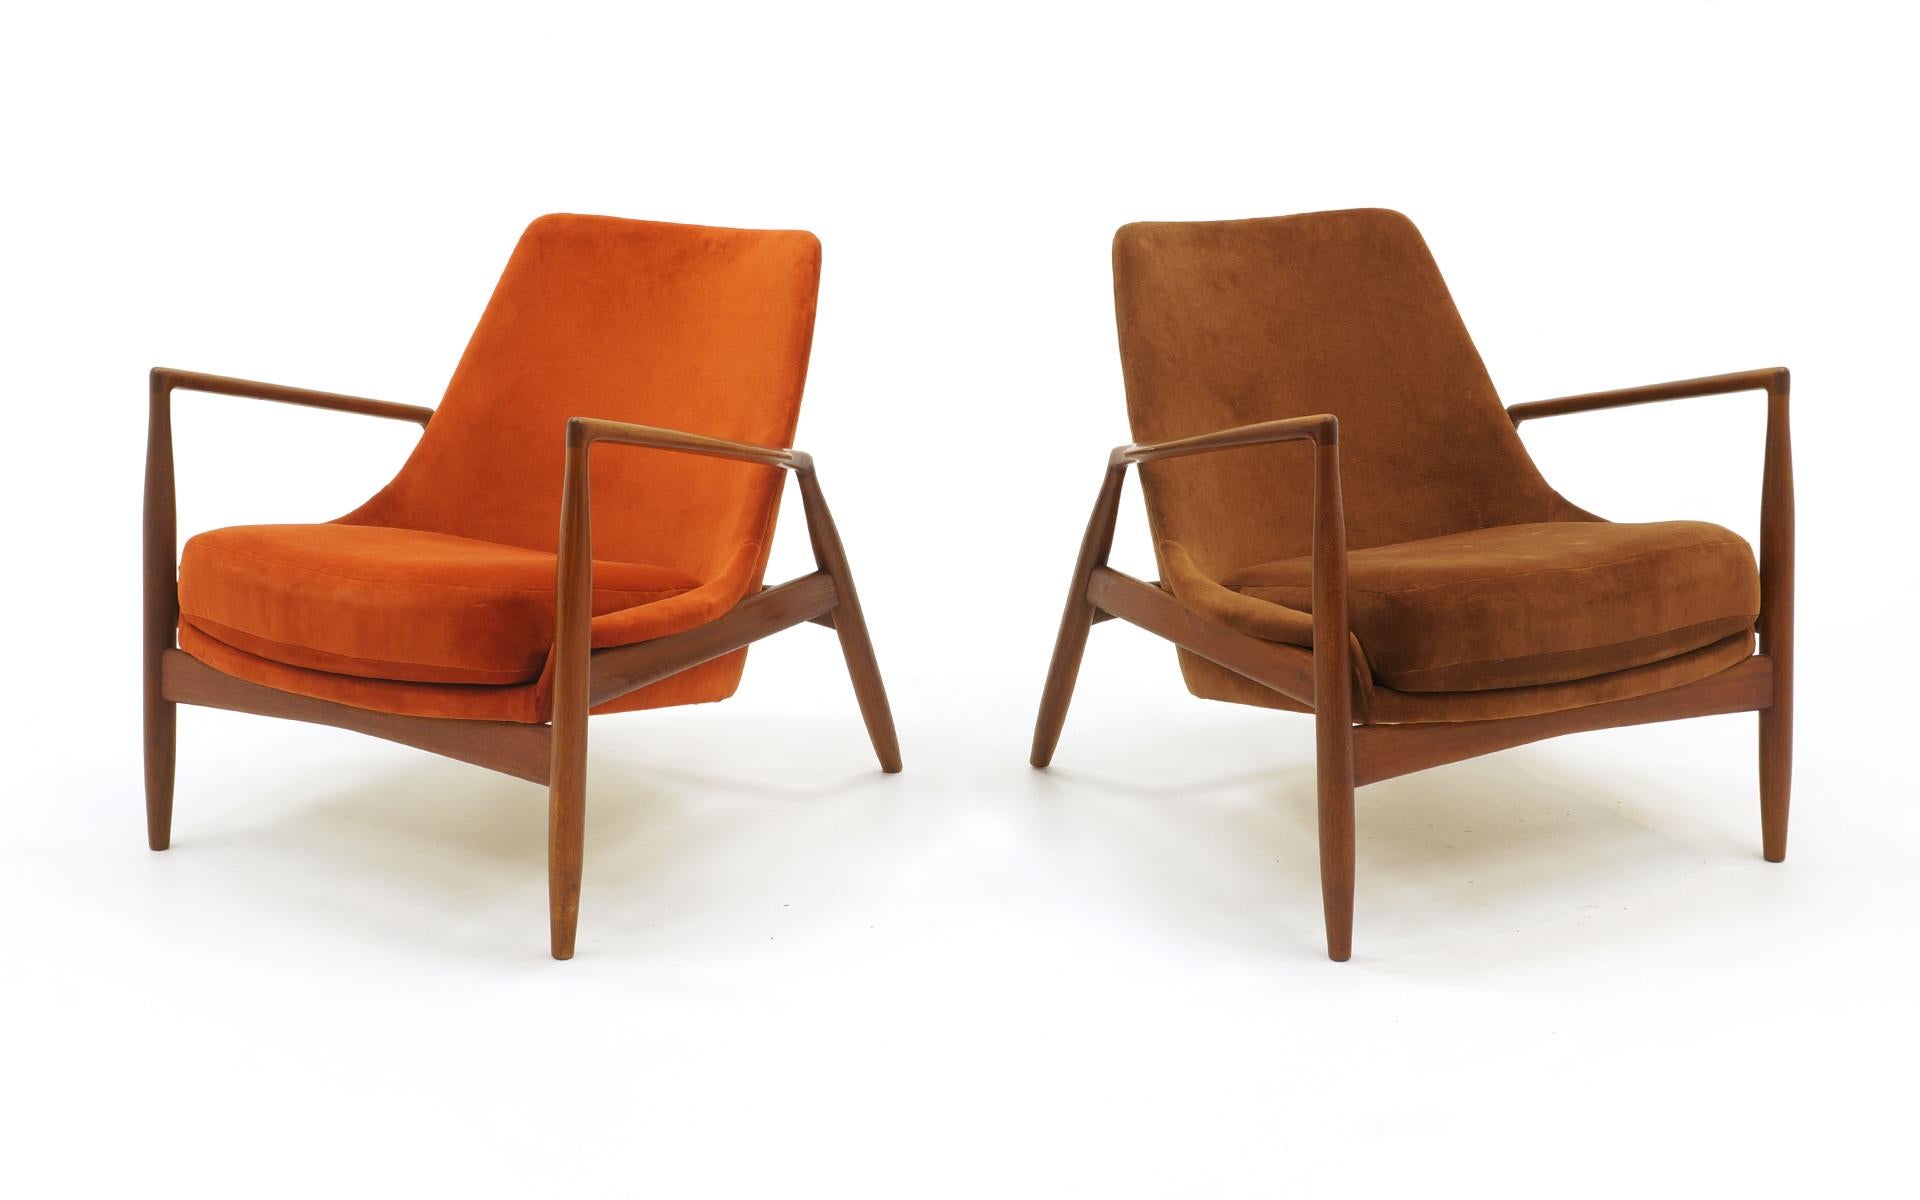 Rare pair of seal chairs by Kofod Larsen. One in a burnt orange velvet and the other in brown velvet. Same fabric, two colors. Teak frames and upholstery in very good to excellent condition.